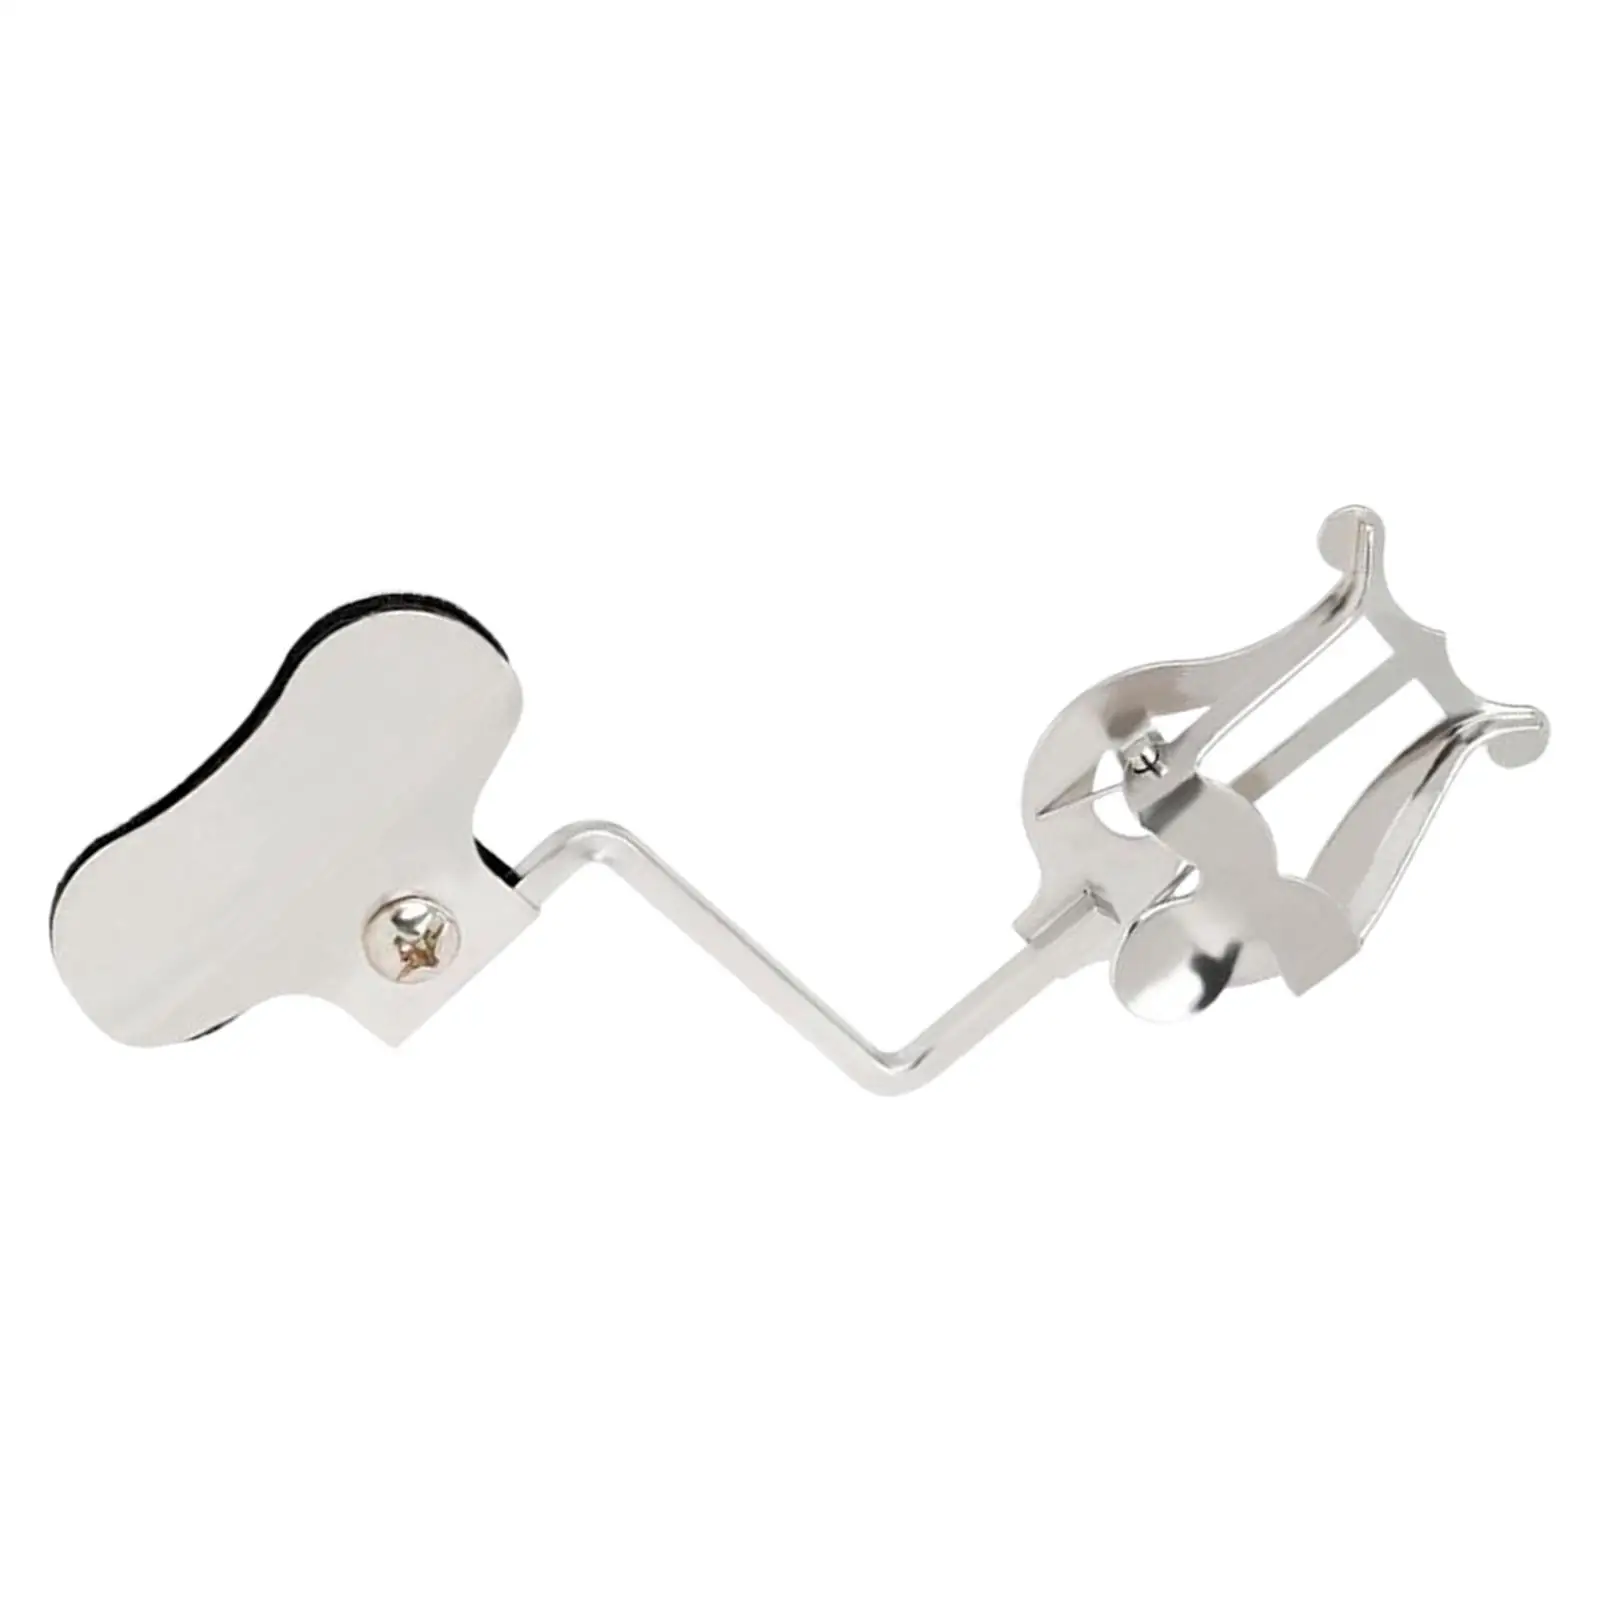 Music Clip Clamp On Holder Trumpet Marching Lyre for Clarinet Saxophone Performing